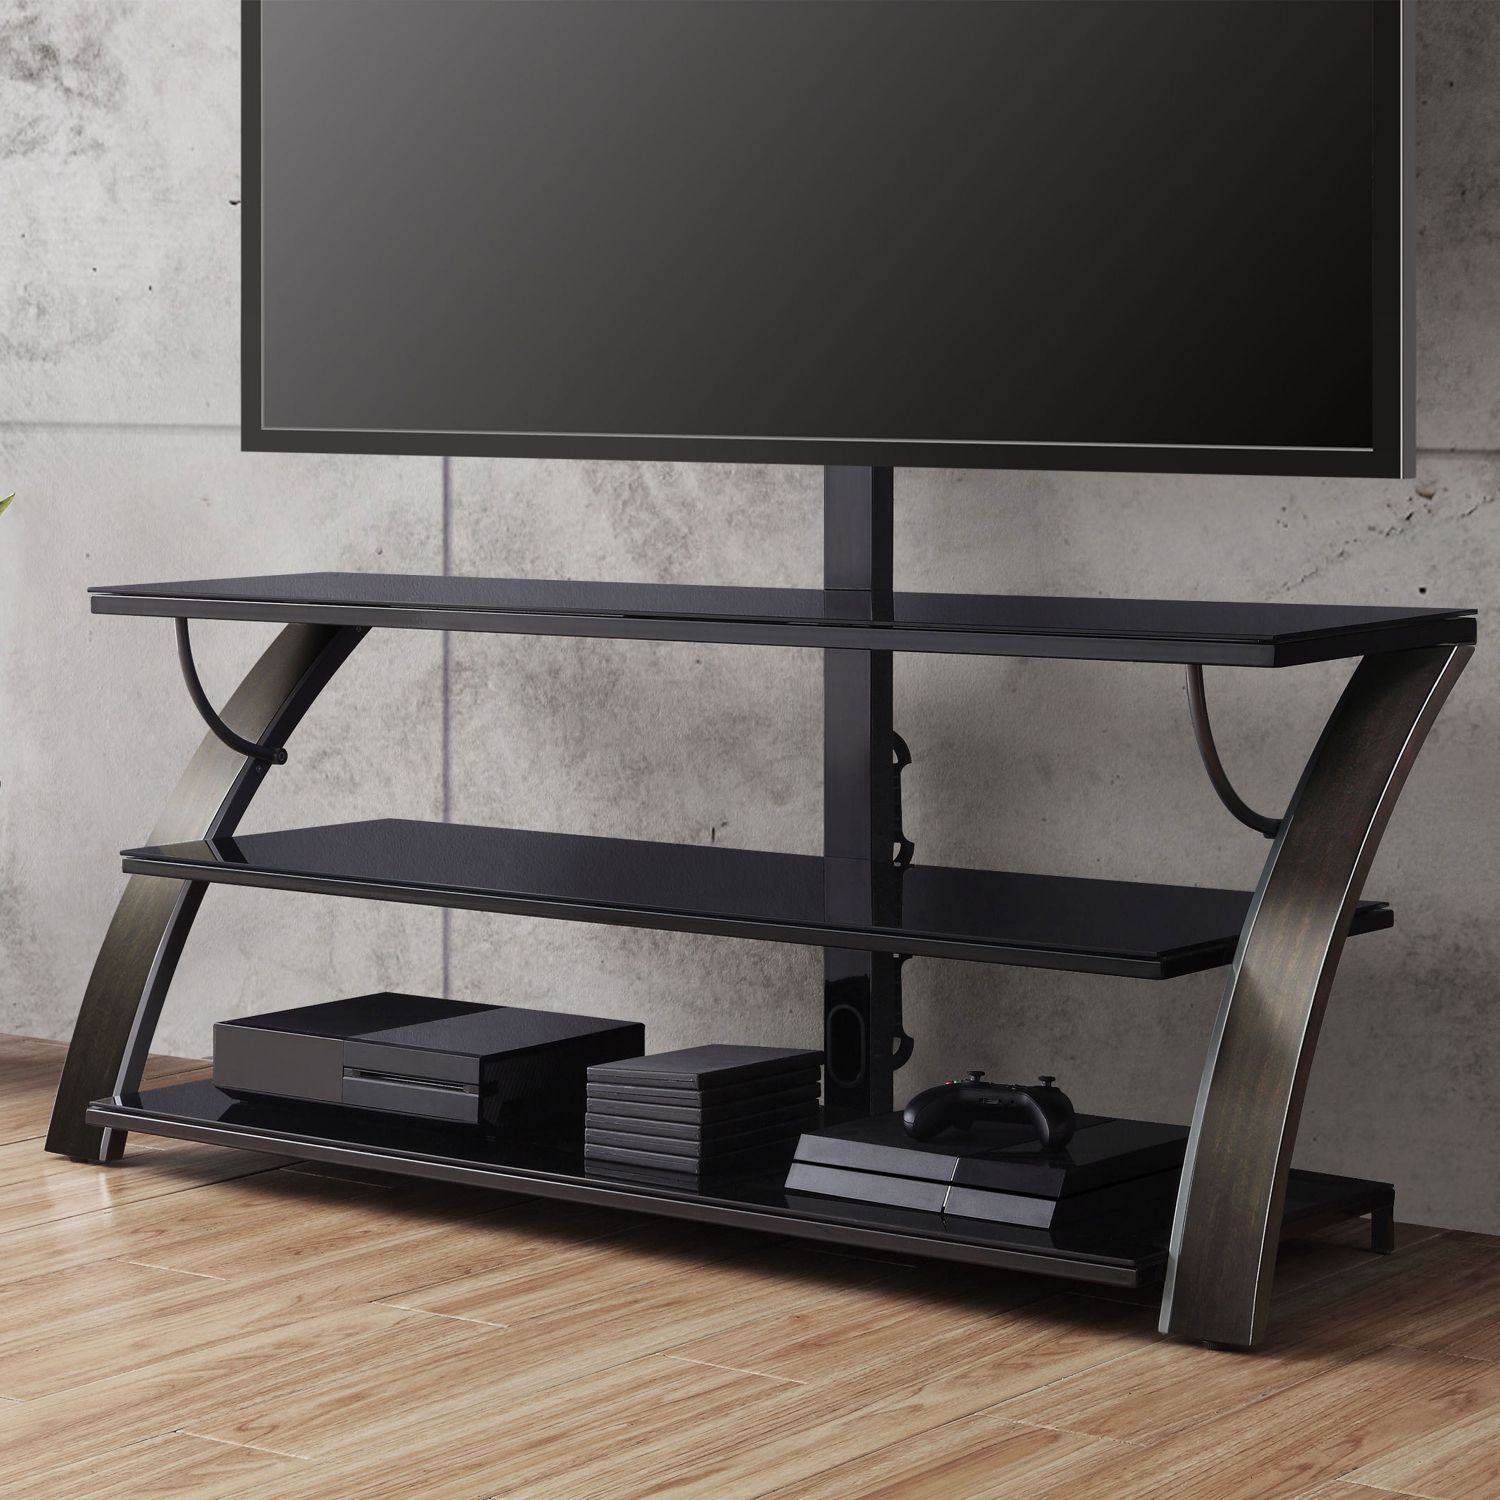 Most Popular Tv Stand Flat Panel For Tvs Up To 65" Screen Entertainment Intended For Whalen Payton 3 In 1 Flat Panel Tv Stands With Multiple Finishes (View 7 of 10)